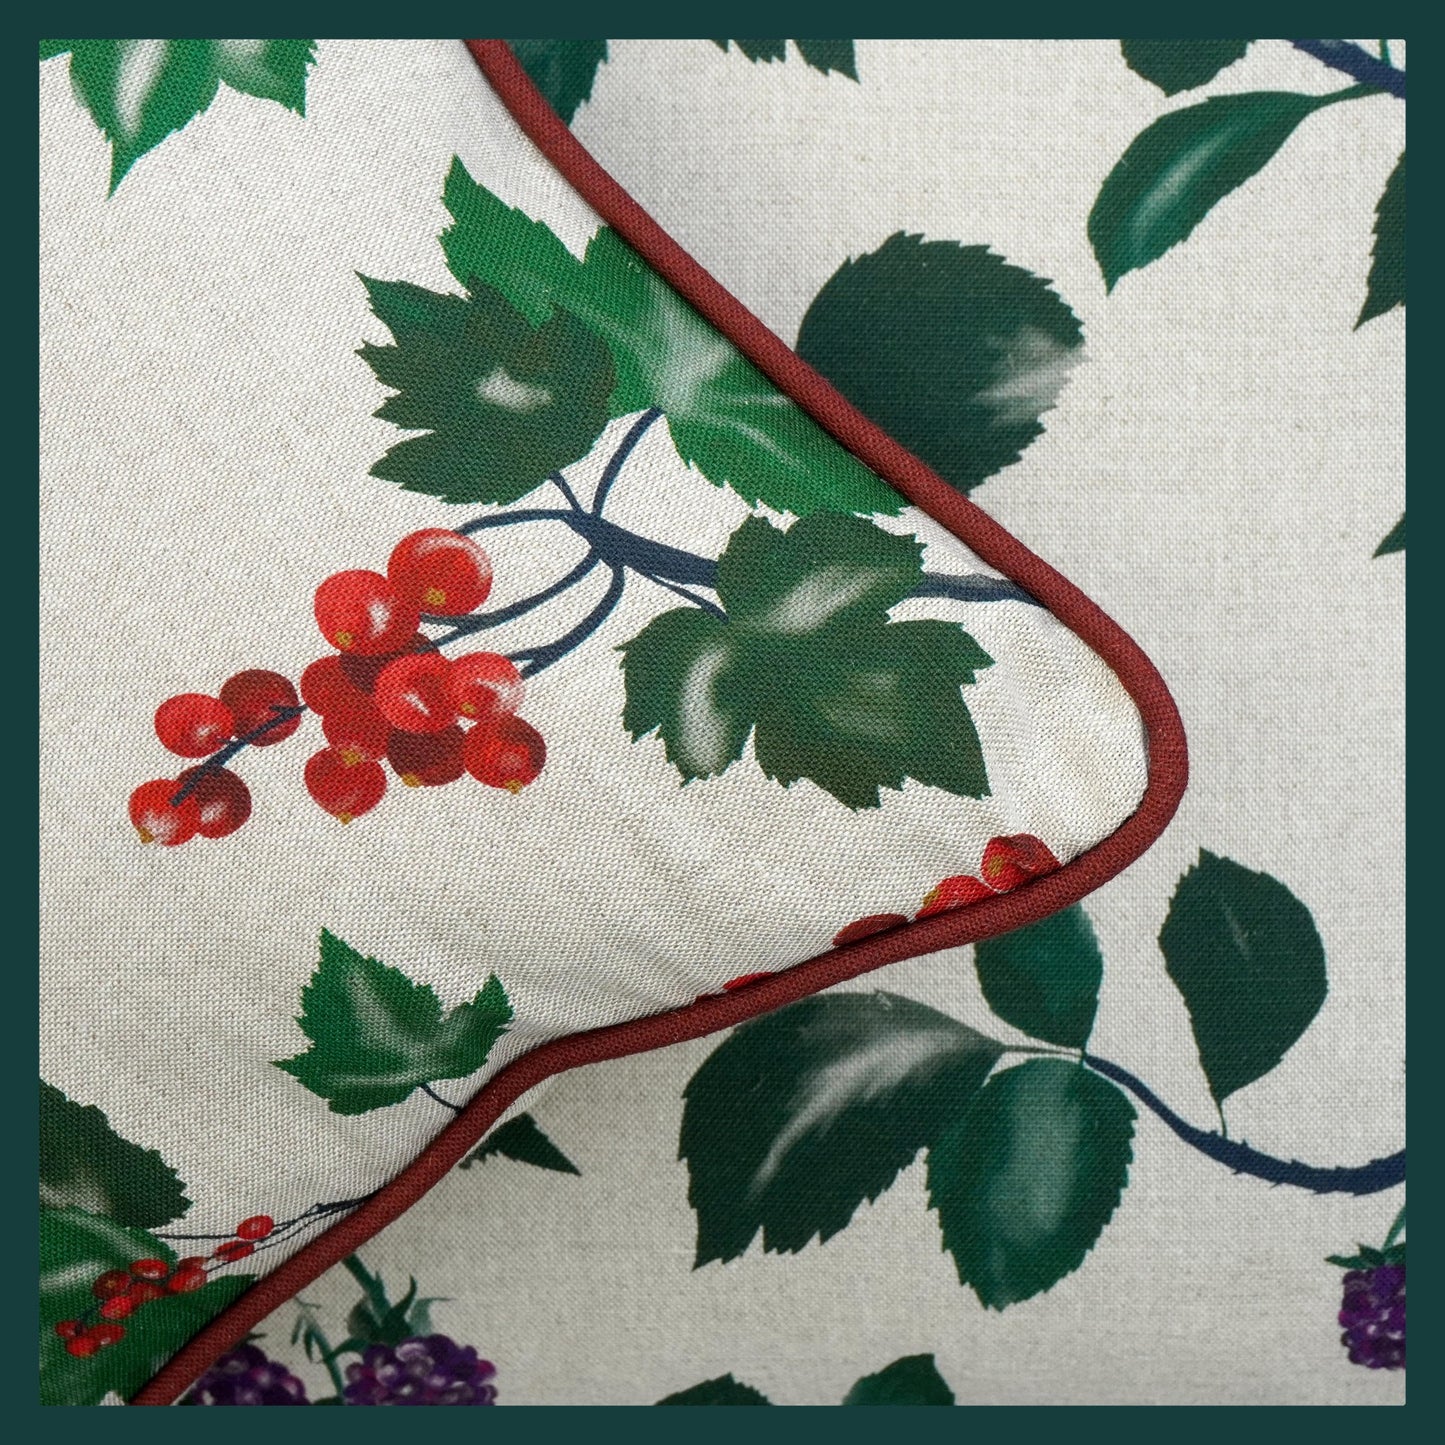 Redcurrant scatter cushion fabric detail